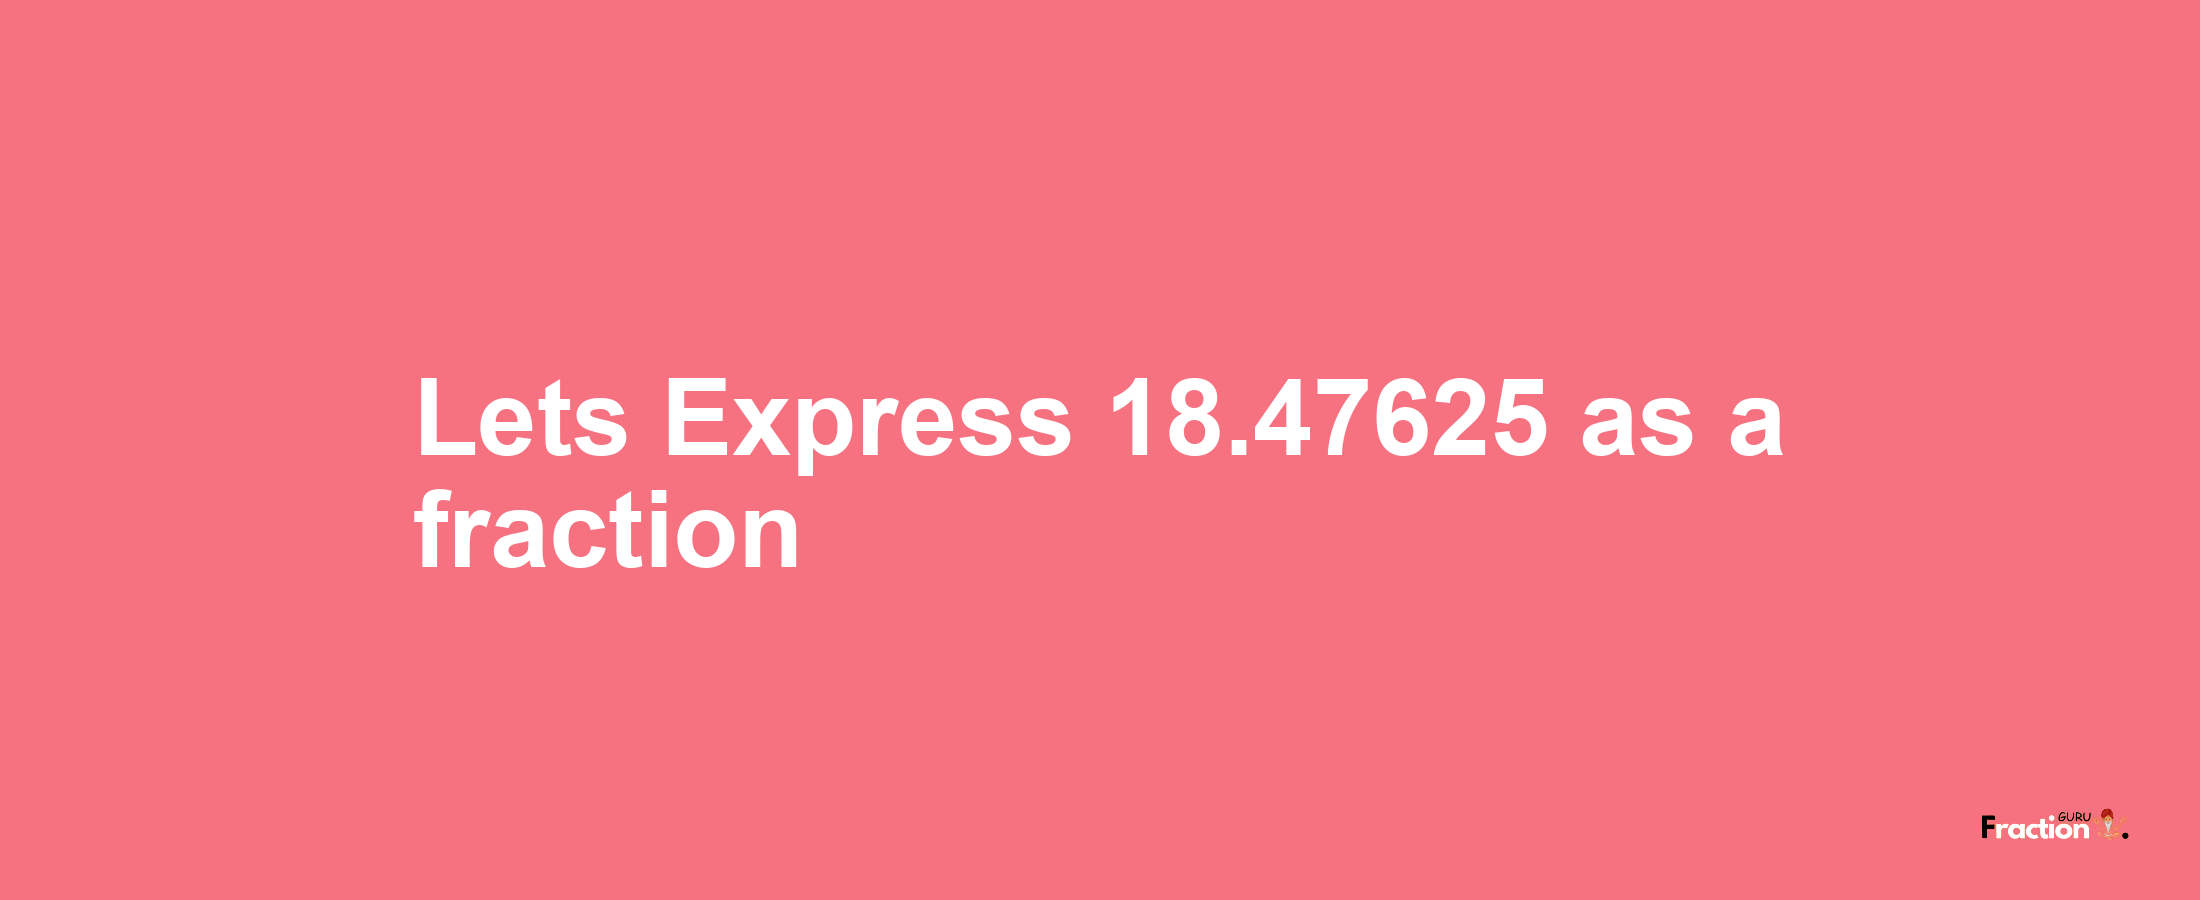 Lets Express 18.47625 as afraction